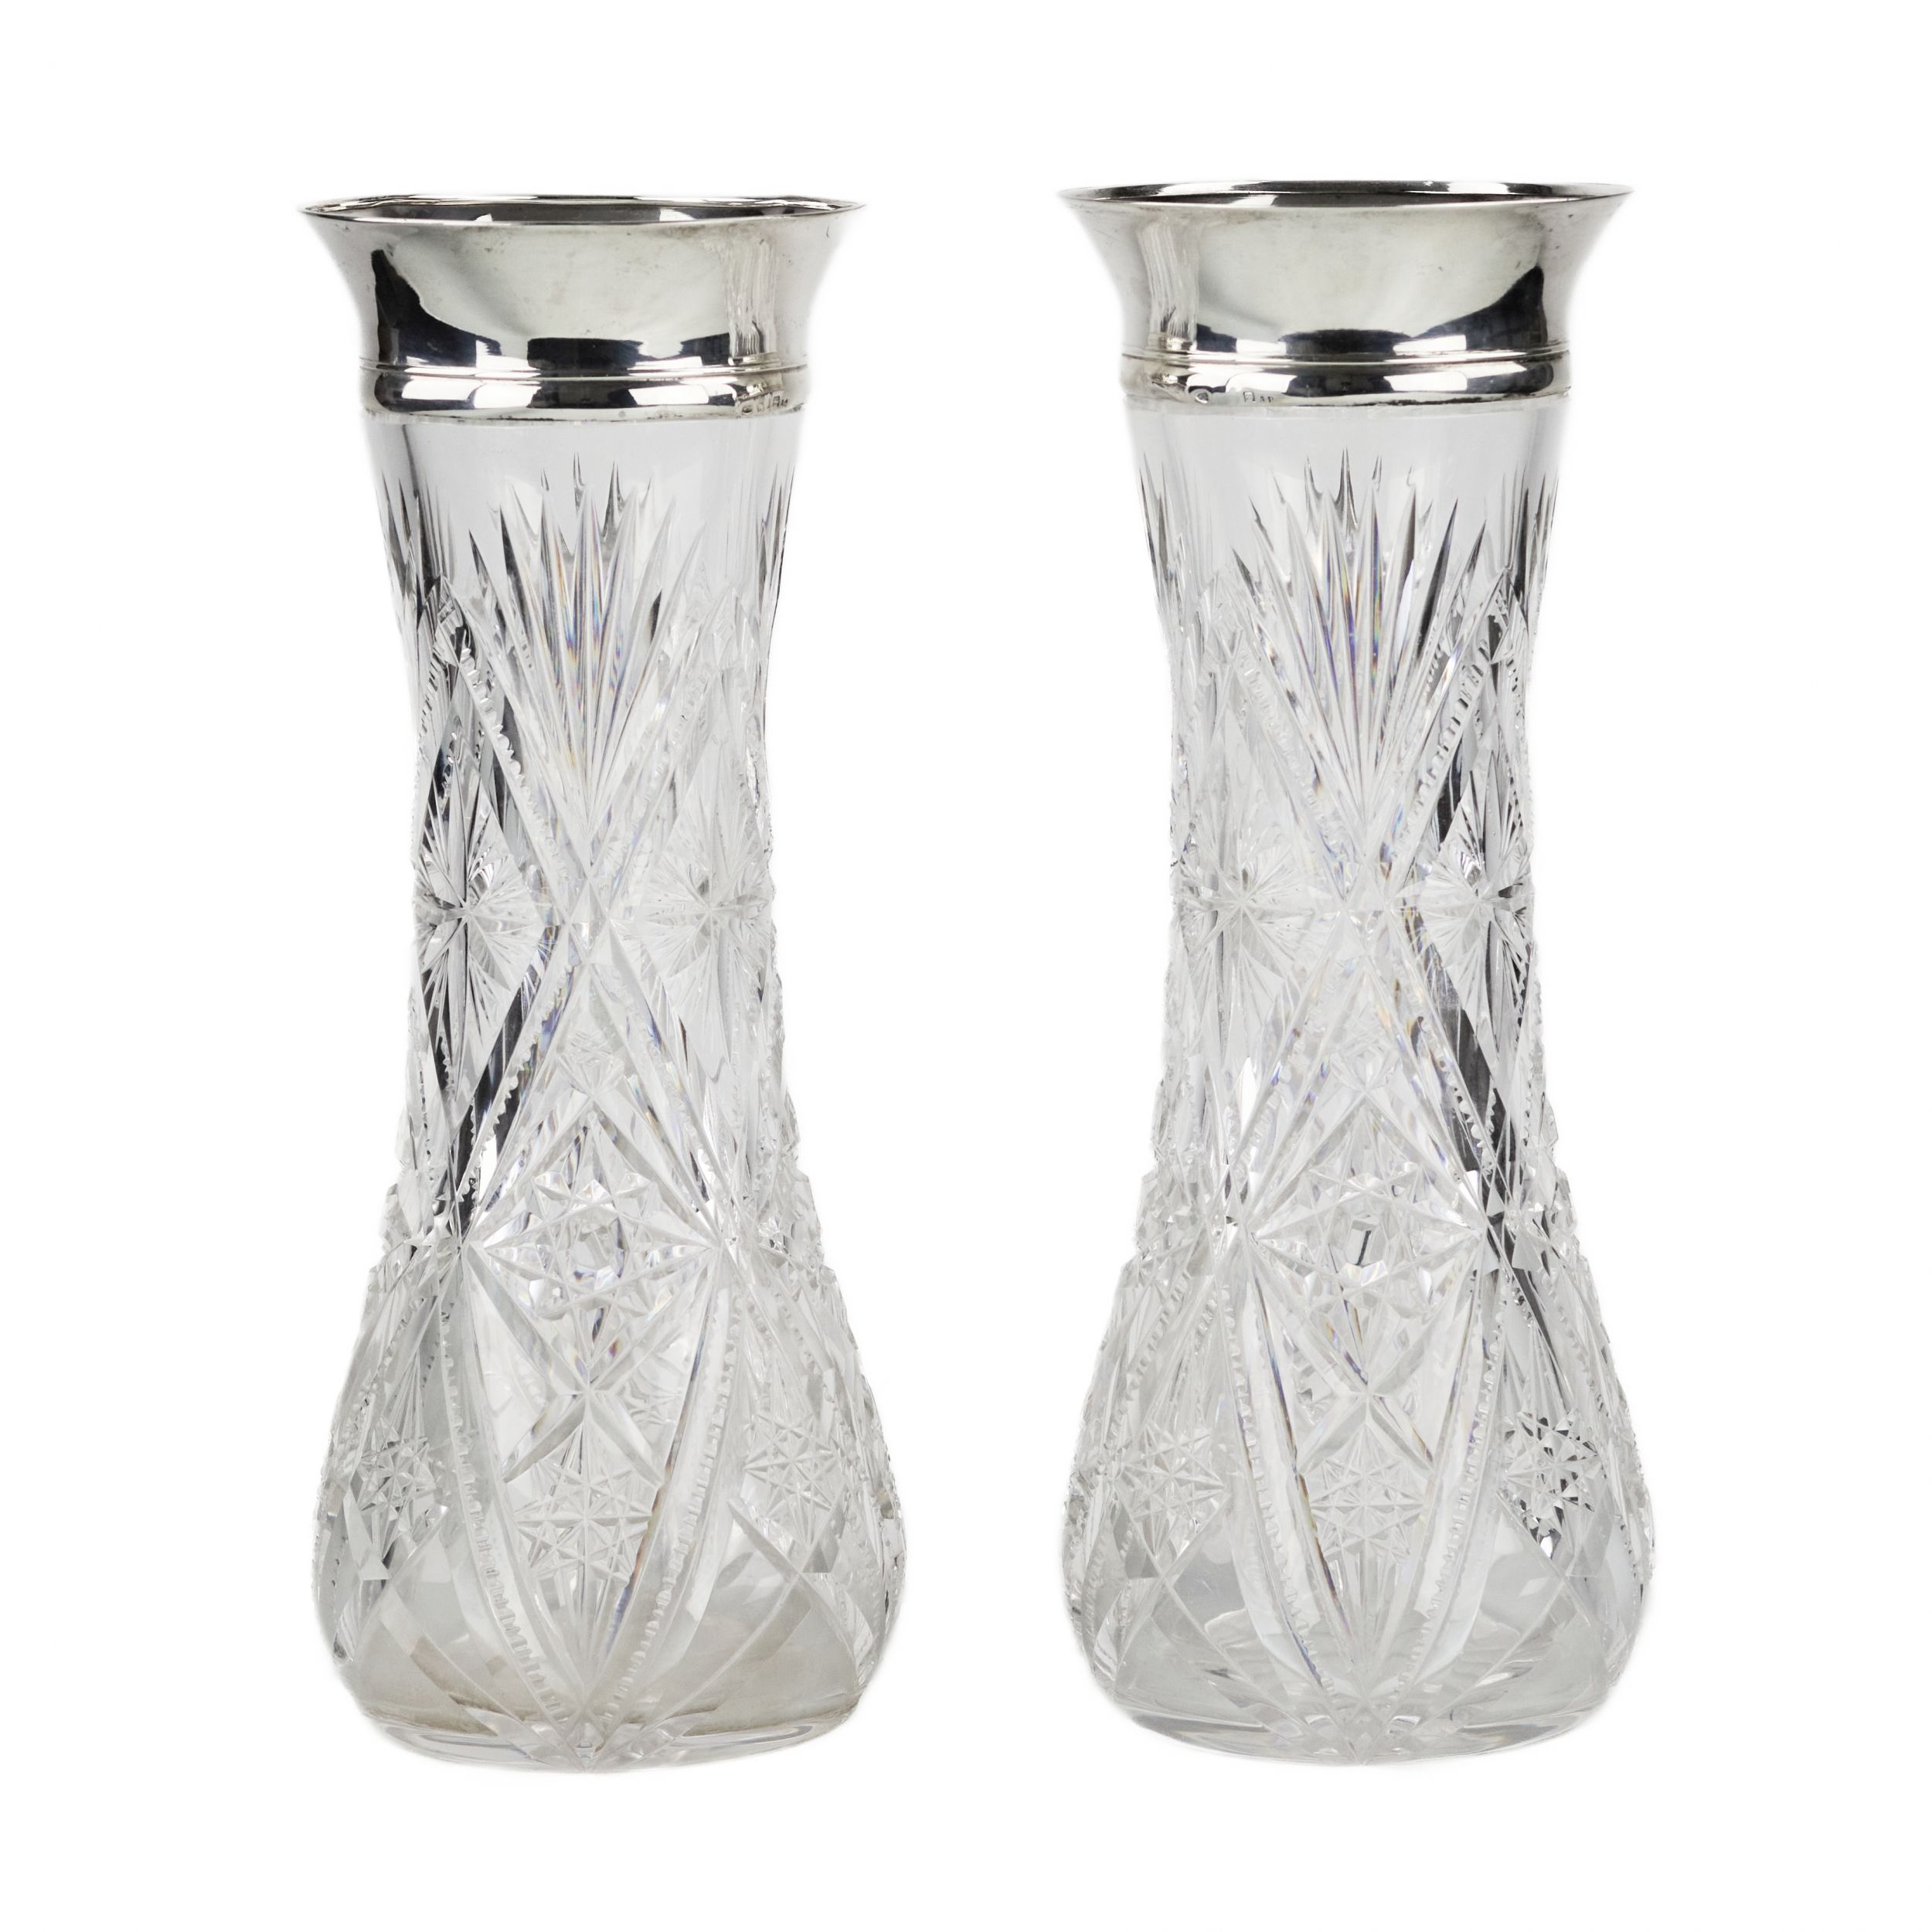 Pair-of-crystal-vases-with-silver-trim-Russia-Riga-1908--1920-